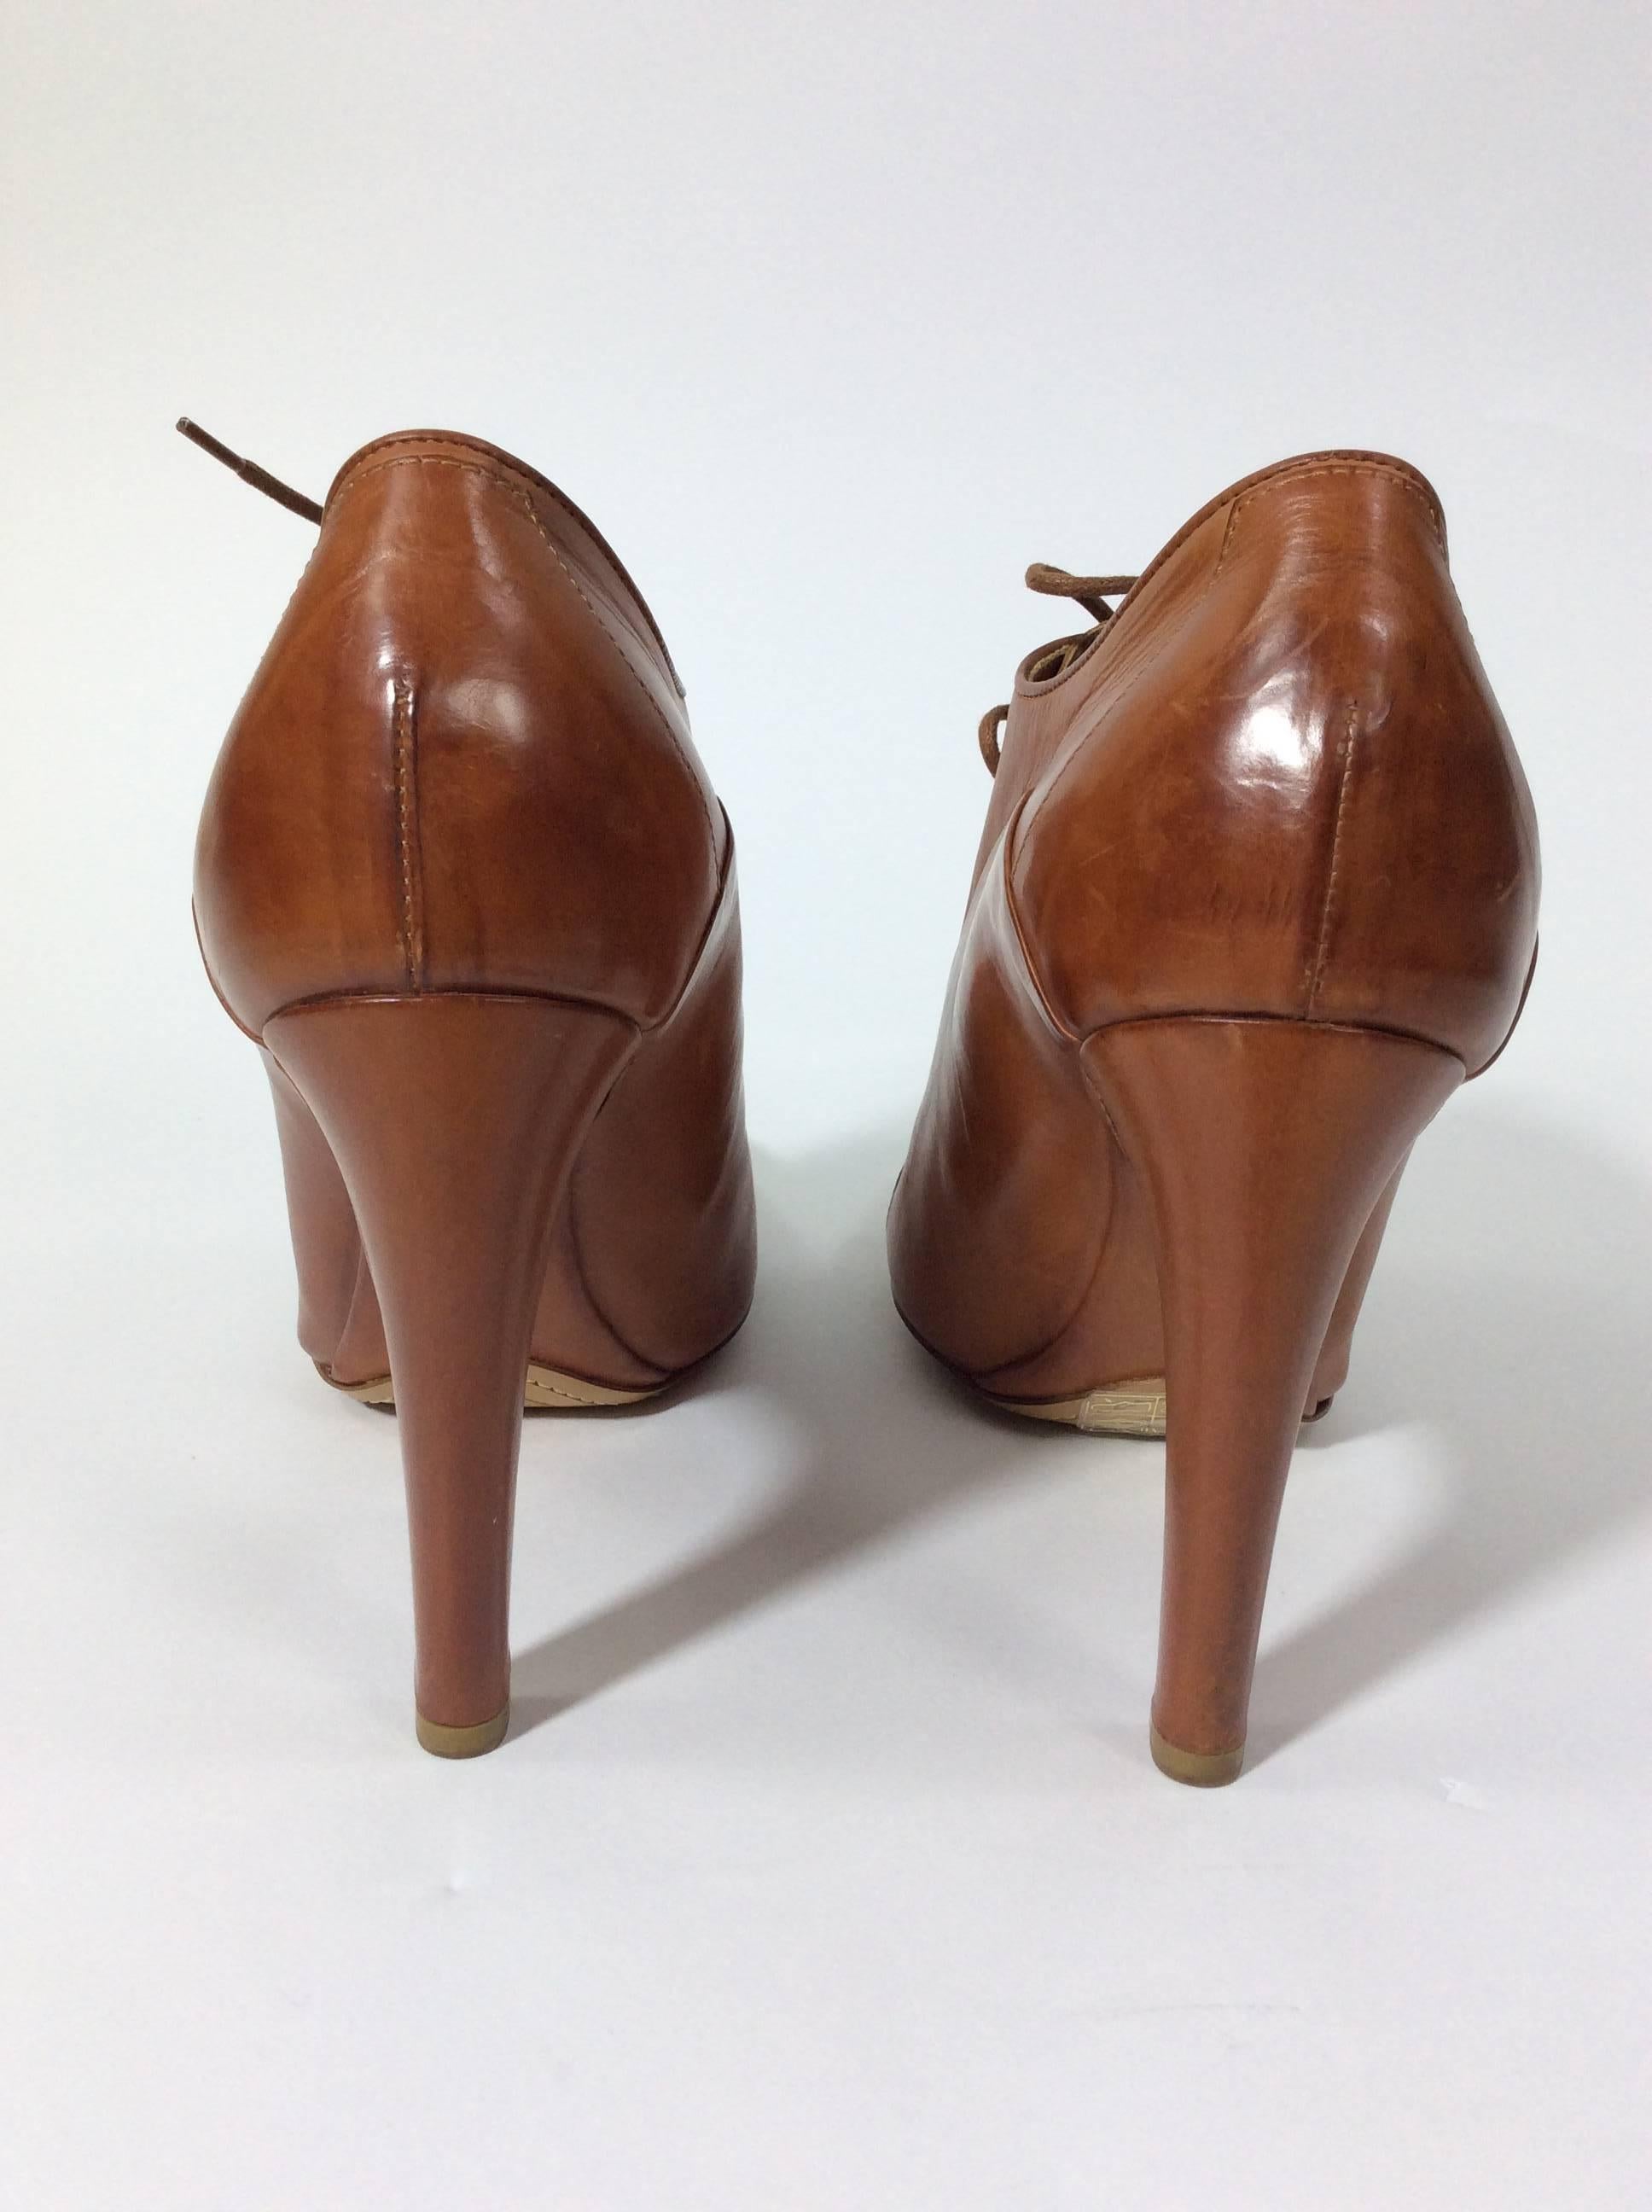 Dries Van Noten Tan Lace Up Bootie In Excellent Condition For Sale In Narberth, PA